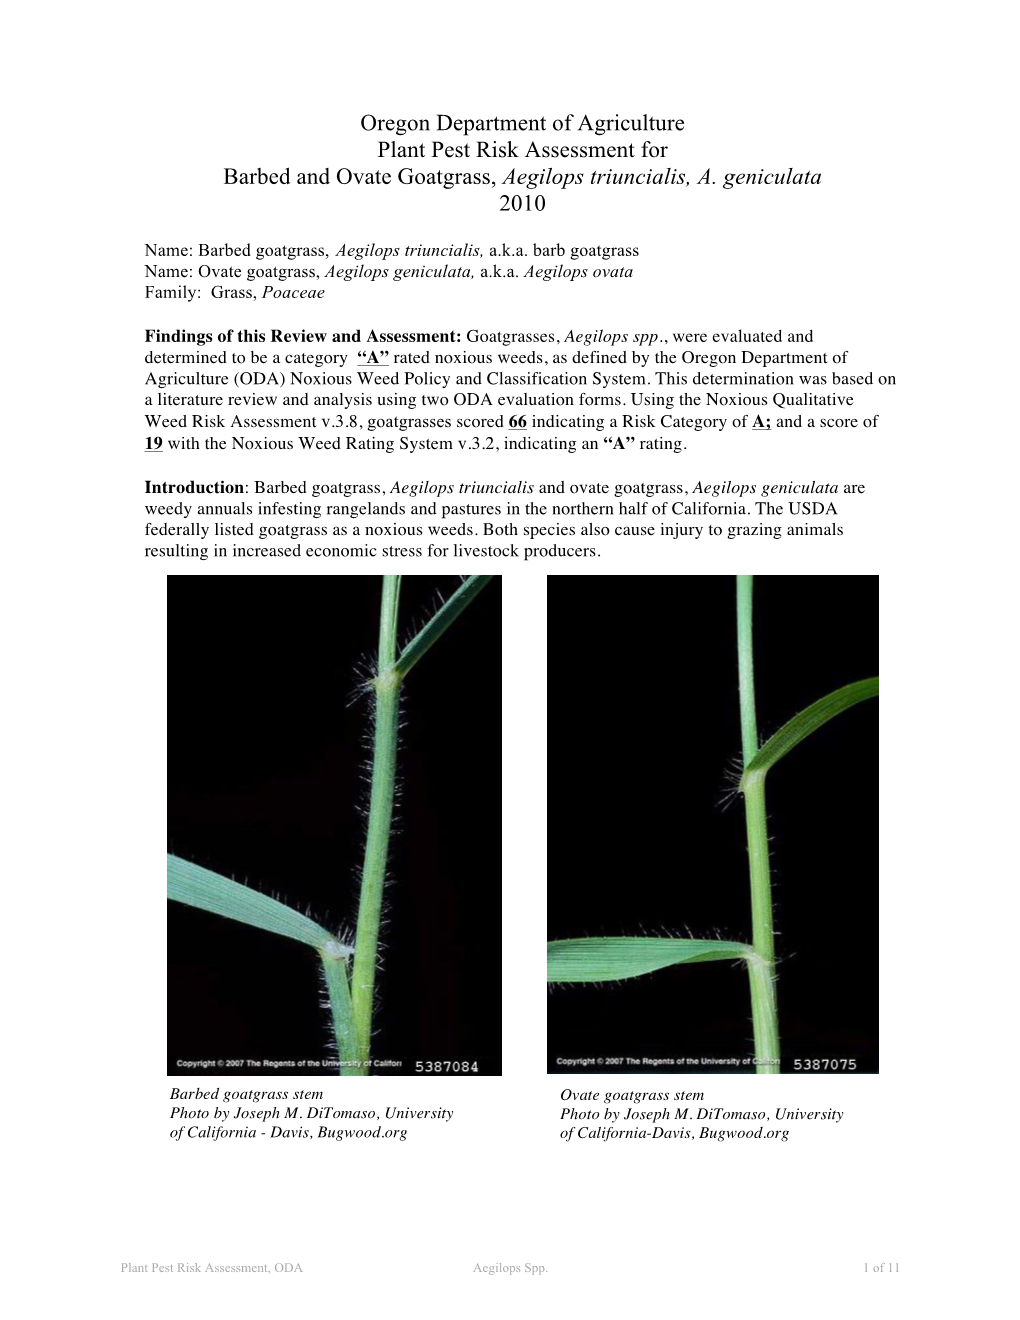 Oregon Department of Agriculture Plant Pest Risk Assessment for Barbed and Ovate Goatgrass, Aegilops Triuncialis, A